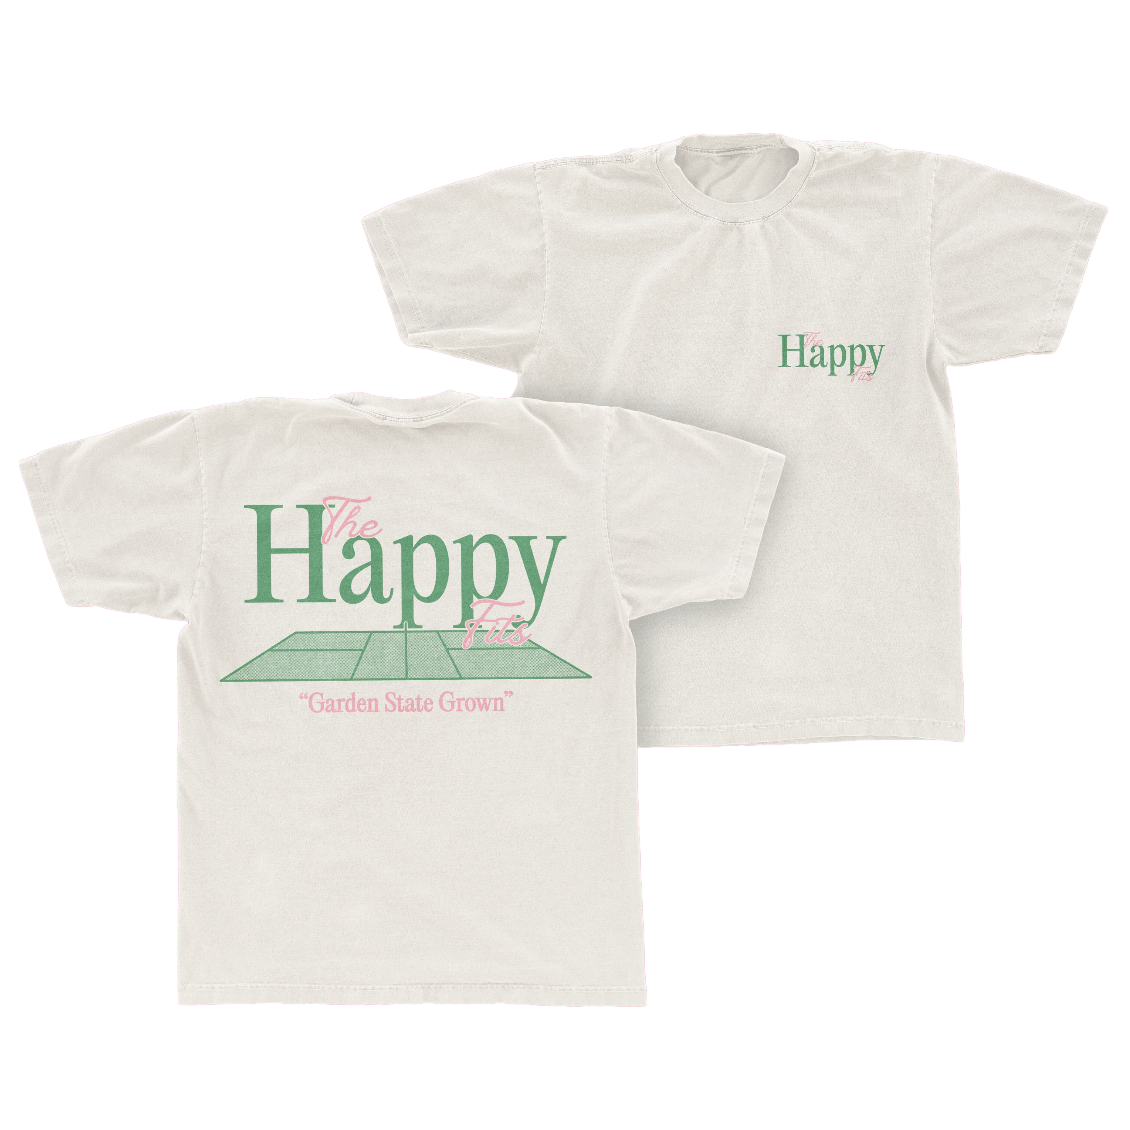 The Happy Fits Garden State Tee front and back